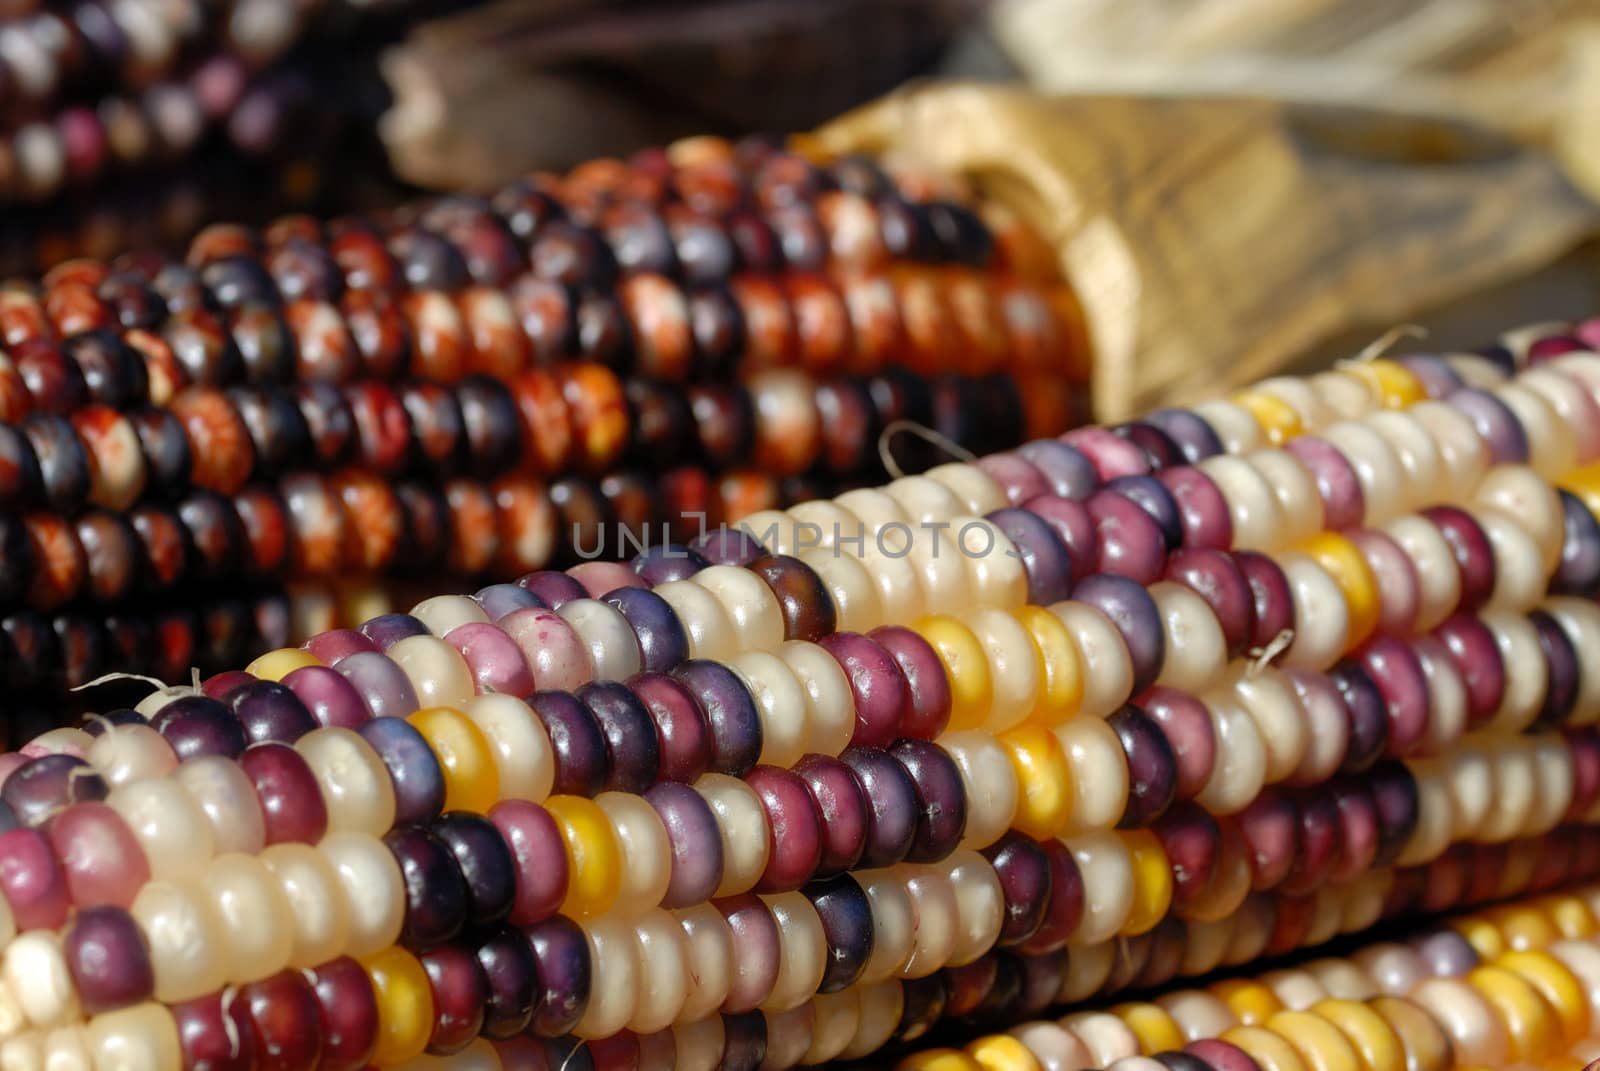 Freshly harvested Indian corn on display at a market